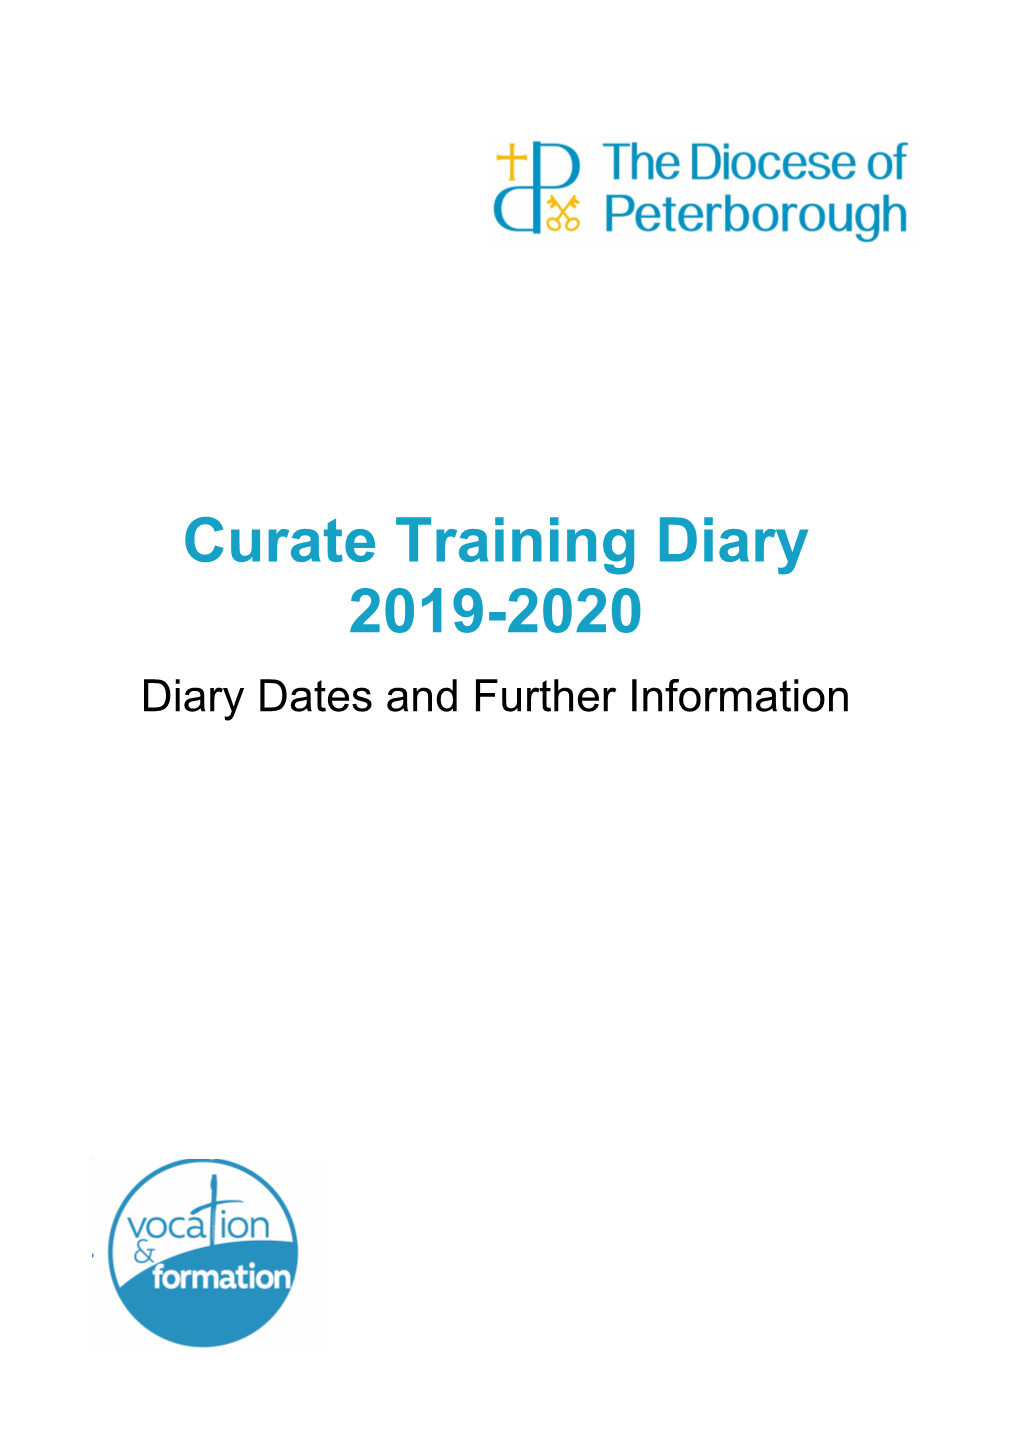 Curate Training Diary with Additional Information 2019-20 Sept 2019 Copy